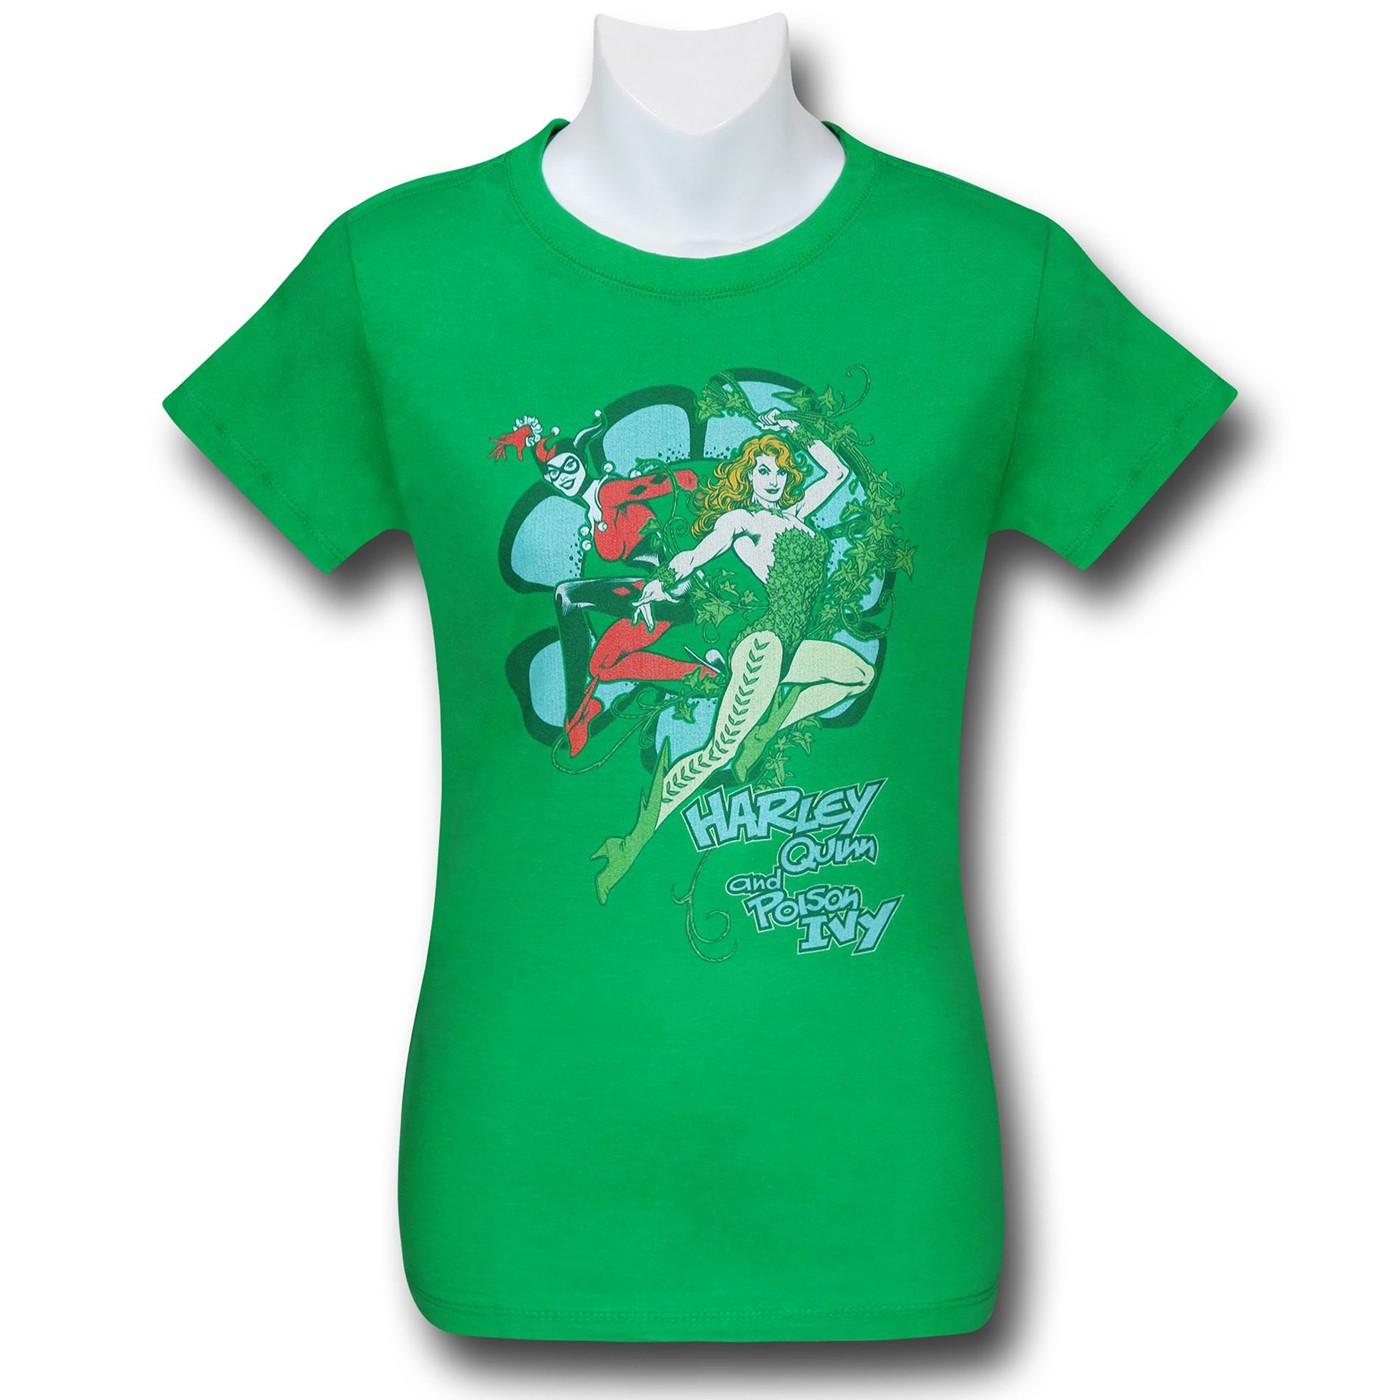 Harley and Ivy Women's Green T-Shirt